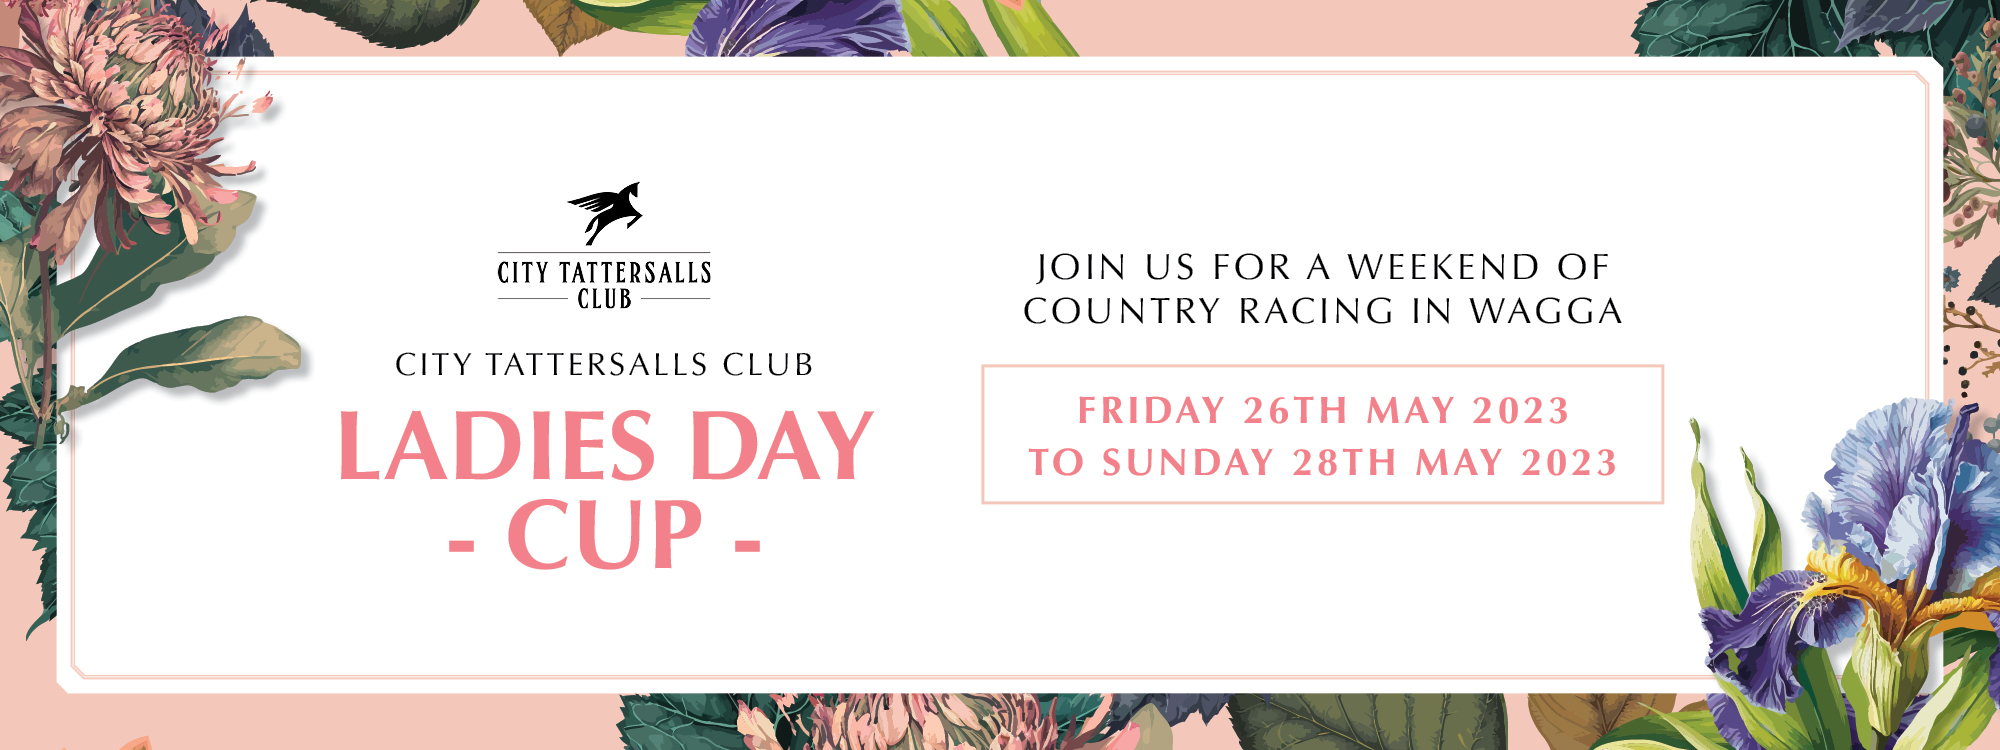 CTC LADIES DAY CUP